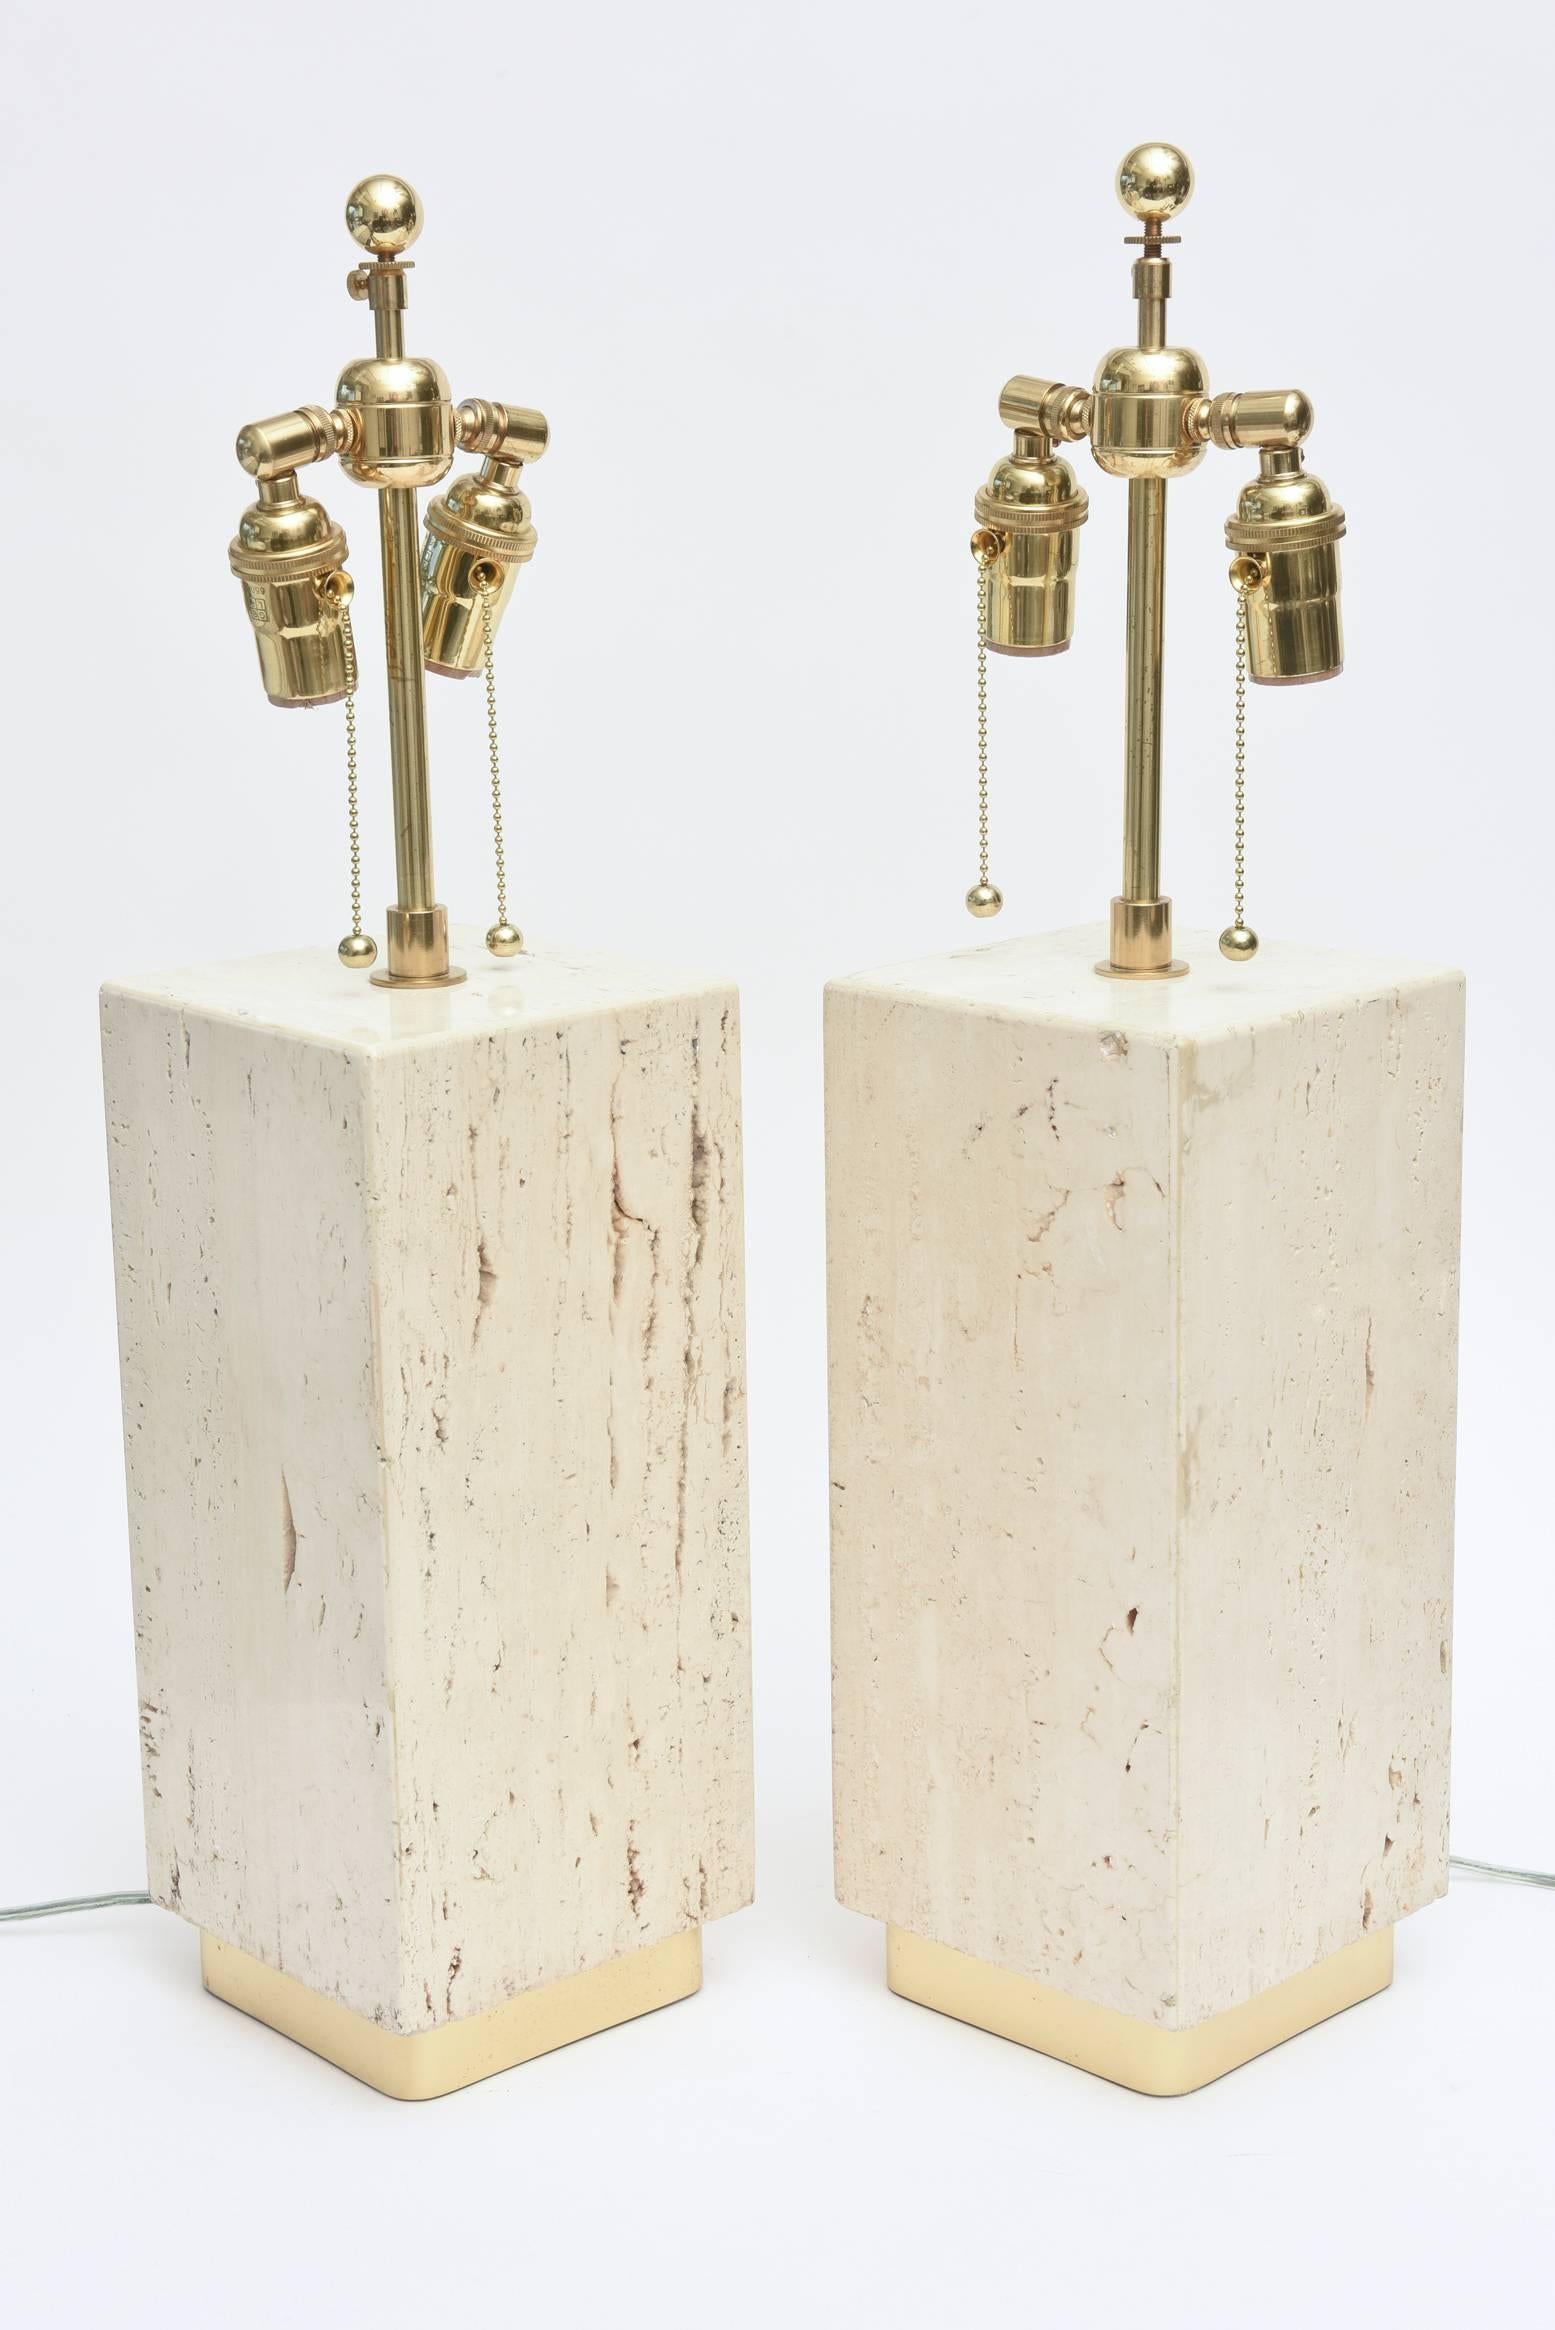 These timeless lamps of travertine and brass are organic in materials and modern in form.
The polished brass square bases and the polished brass hardware add to the yin and yang of earthy meets polish.
Their thick column form adds modernity.
 The